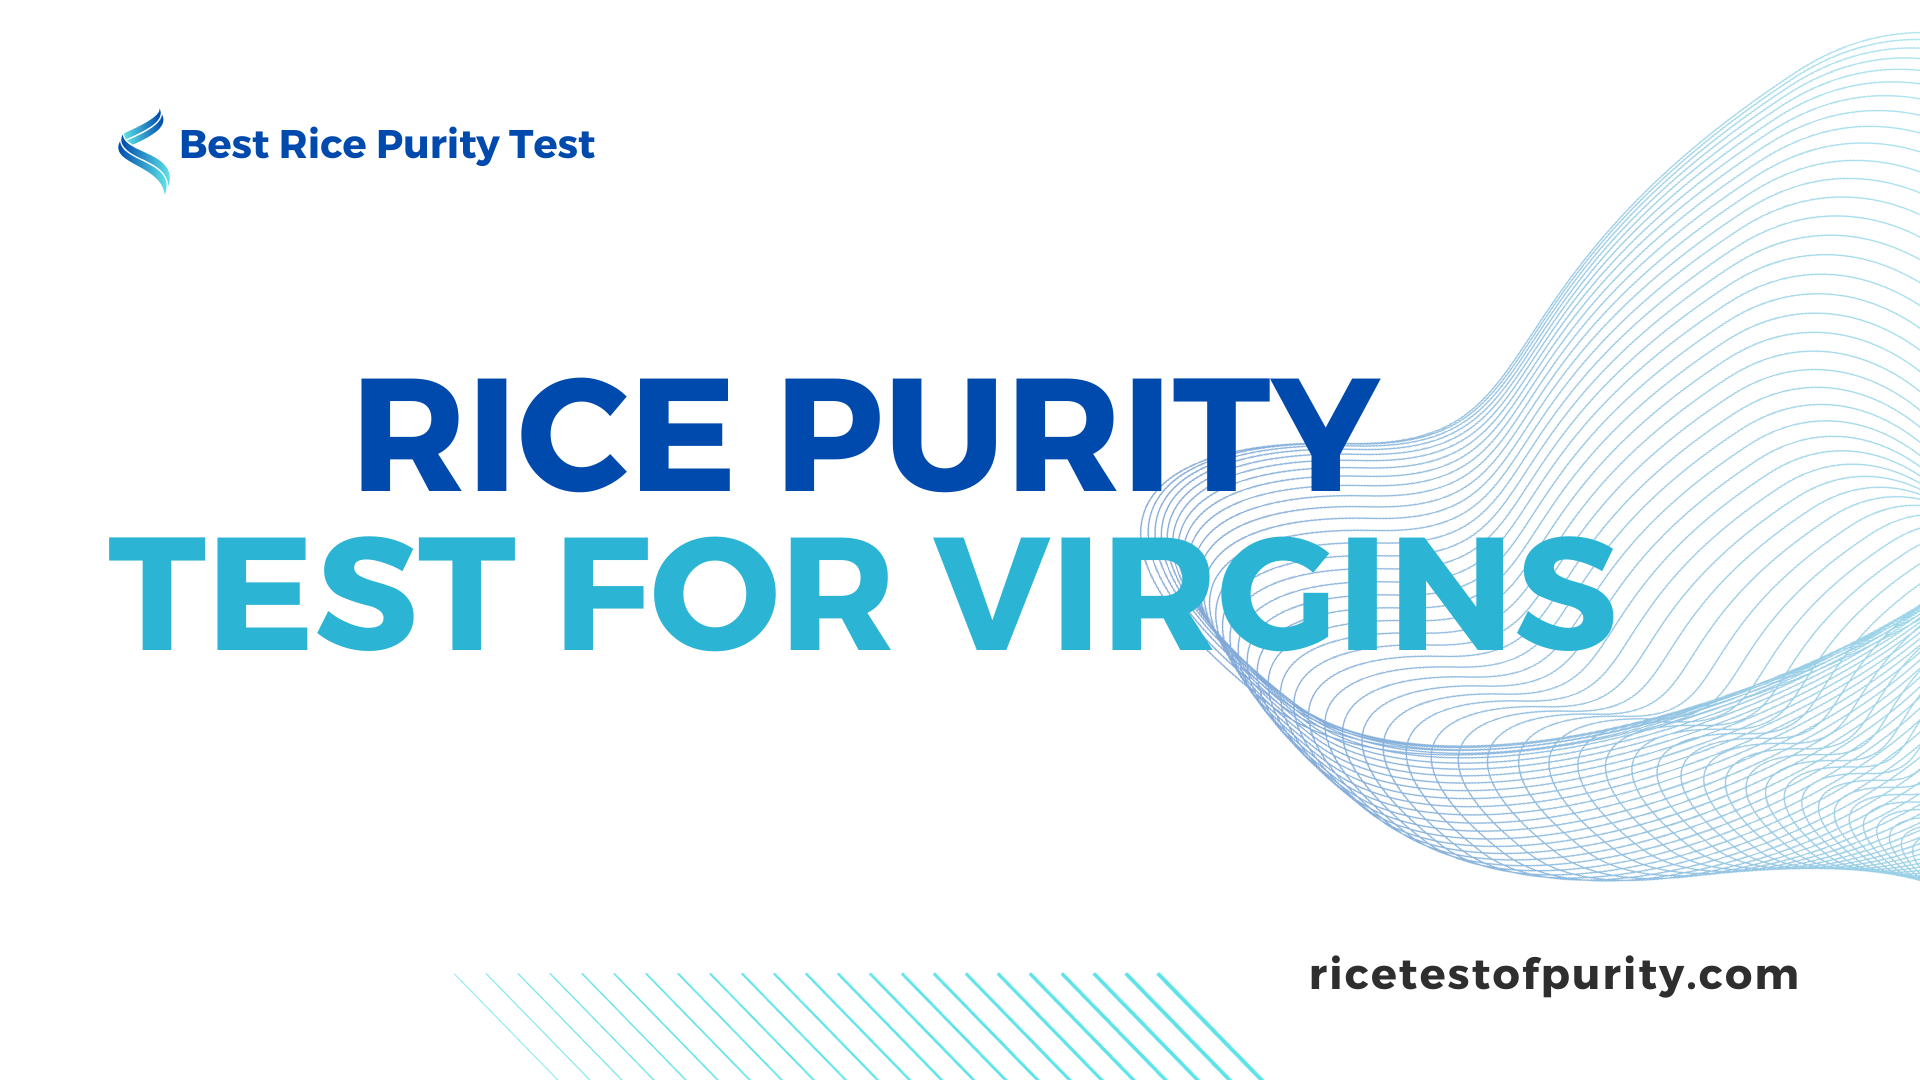 Rice Purity Test For Virgin